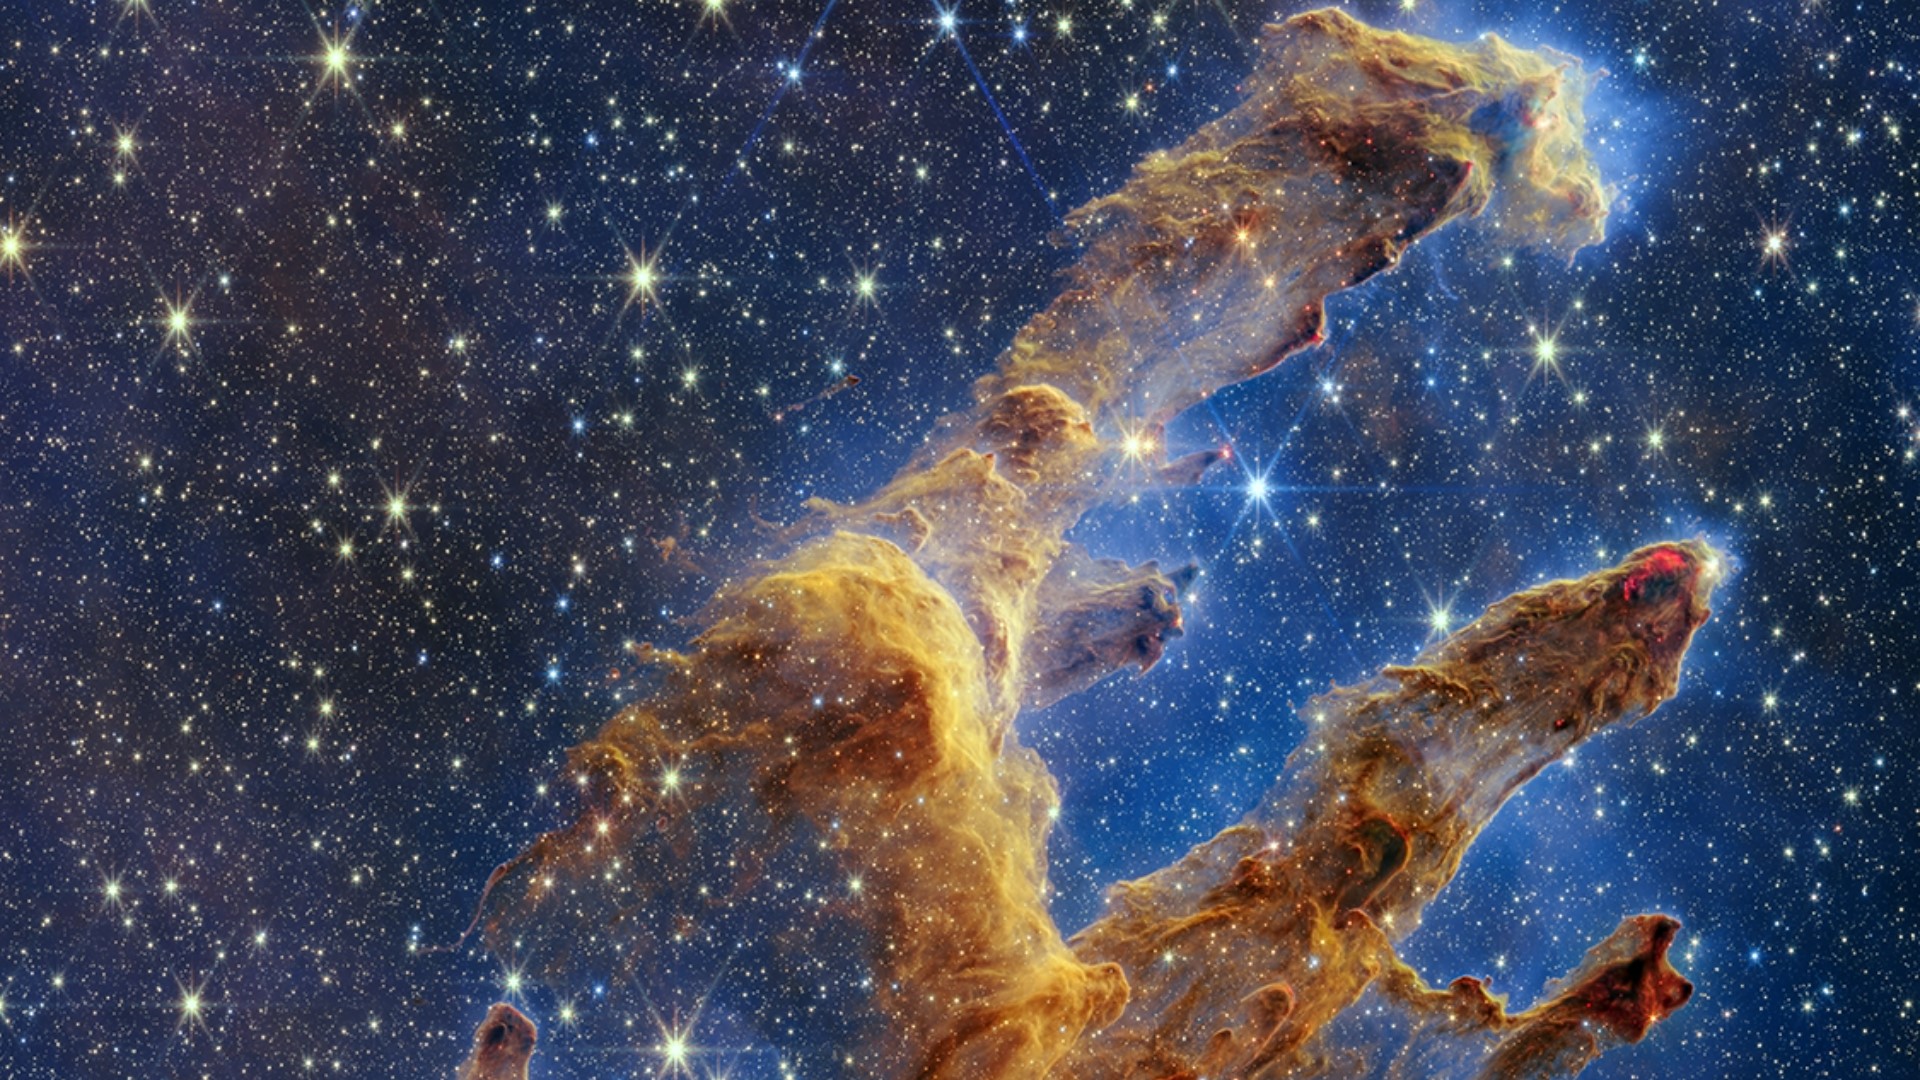 The star-studded new image captures the famed pillars in near-infrared light, allowing NASA's Webb telescope to see thousands of newly-formed stars.